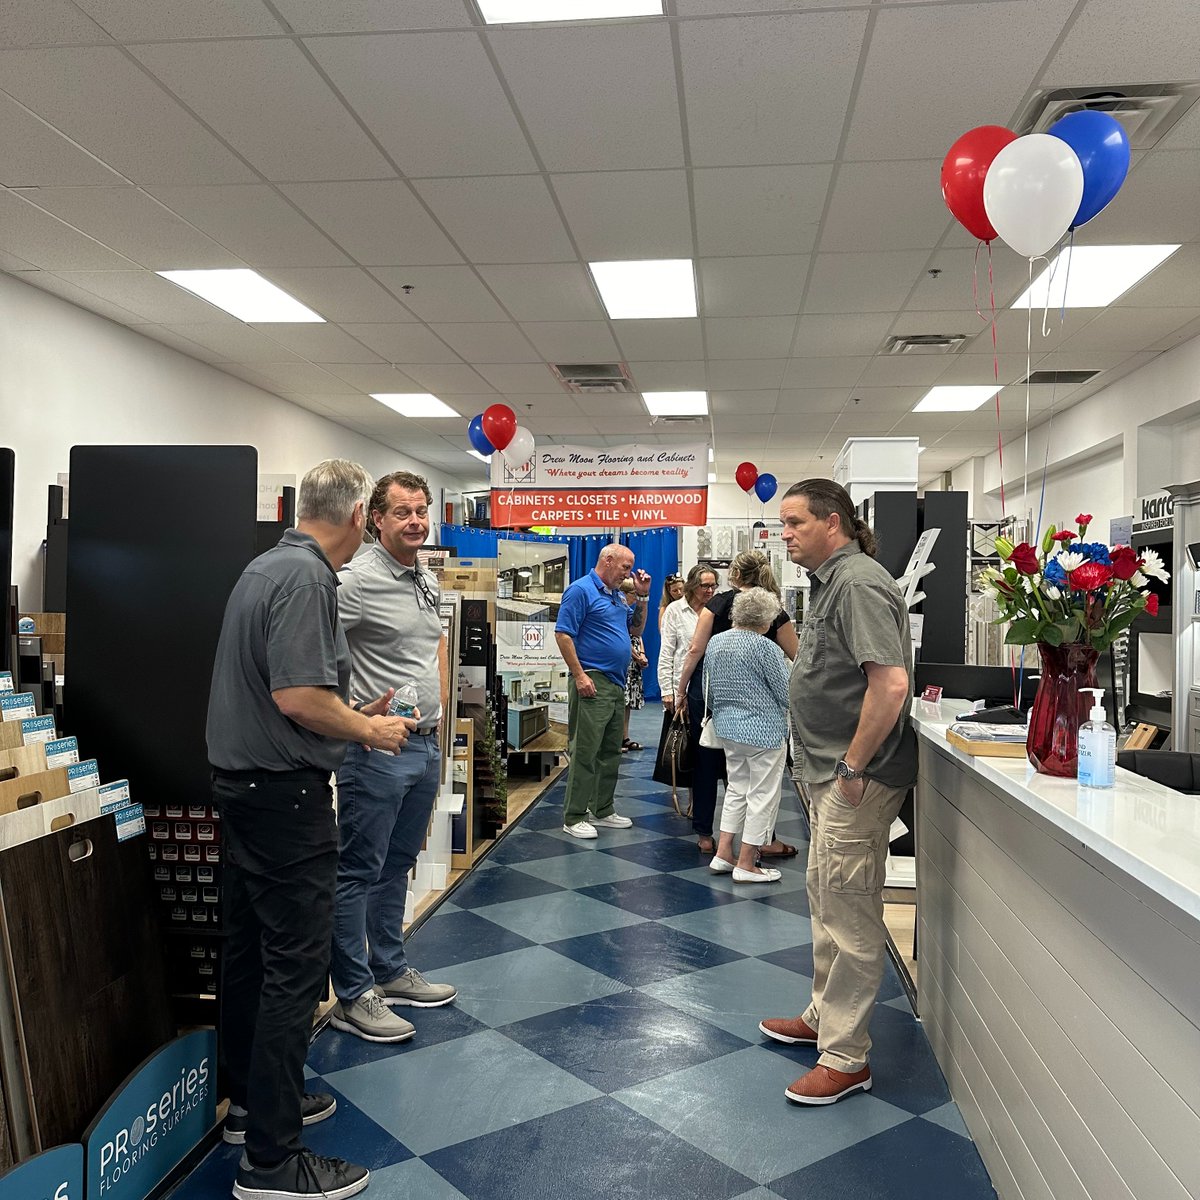 This afternoon, we were excited to bring a biodegradable confetti-filled celebration to Drew Moon Flooring and Cabinets. Congratulations to Andrew and his team on a wonderful ribbon cutting ceremony!

#SupportLocal #RibbonCutting #NassauCounty #Florida #WeAreTheChamber